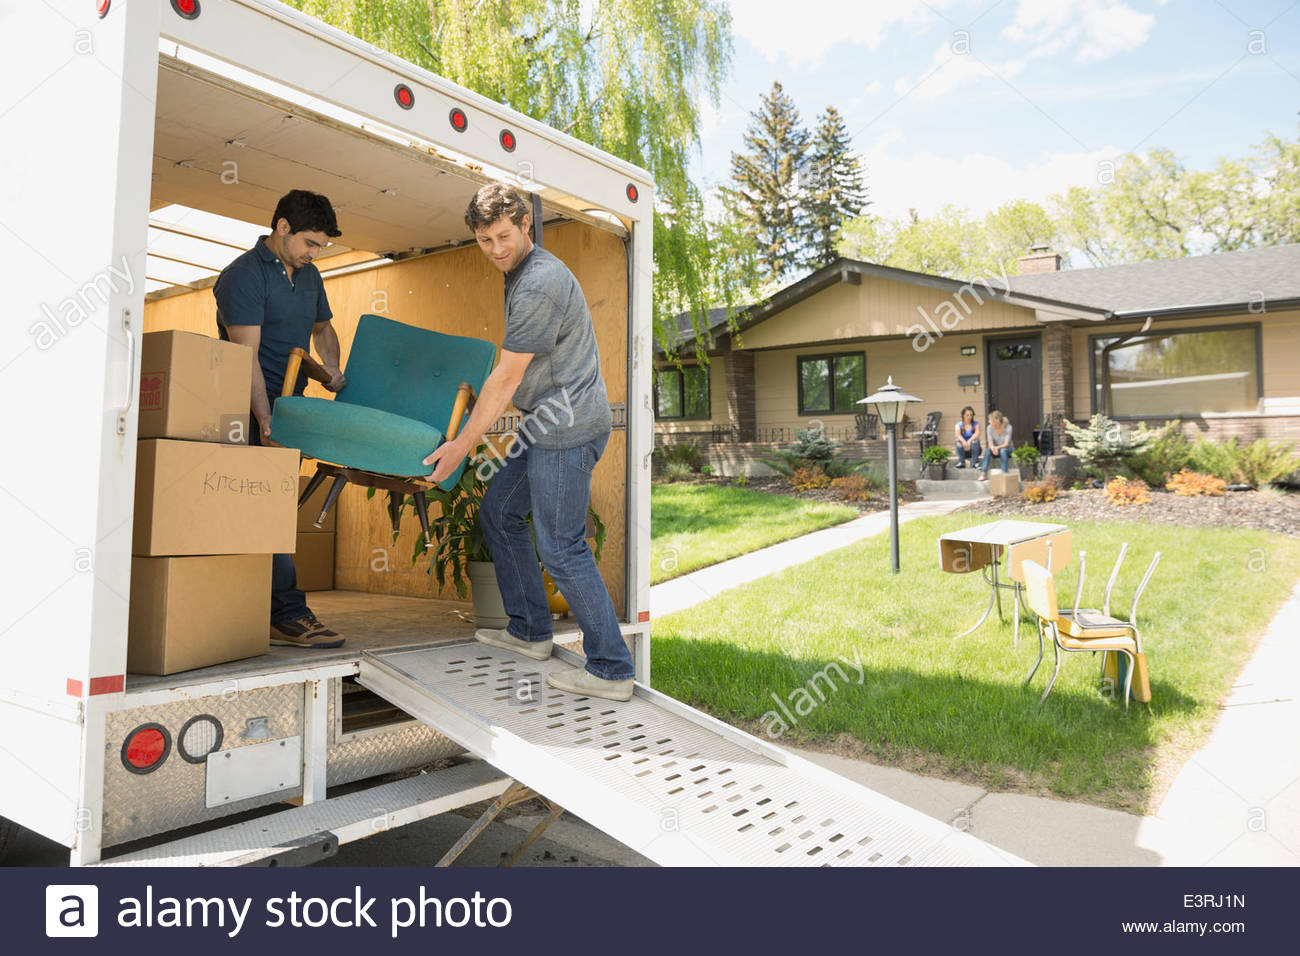 Men unloading chair from moving van Stock Photo